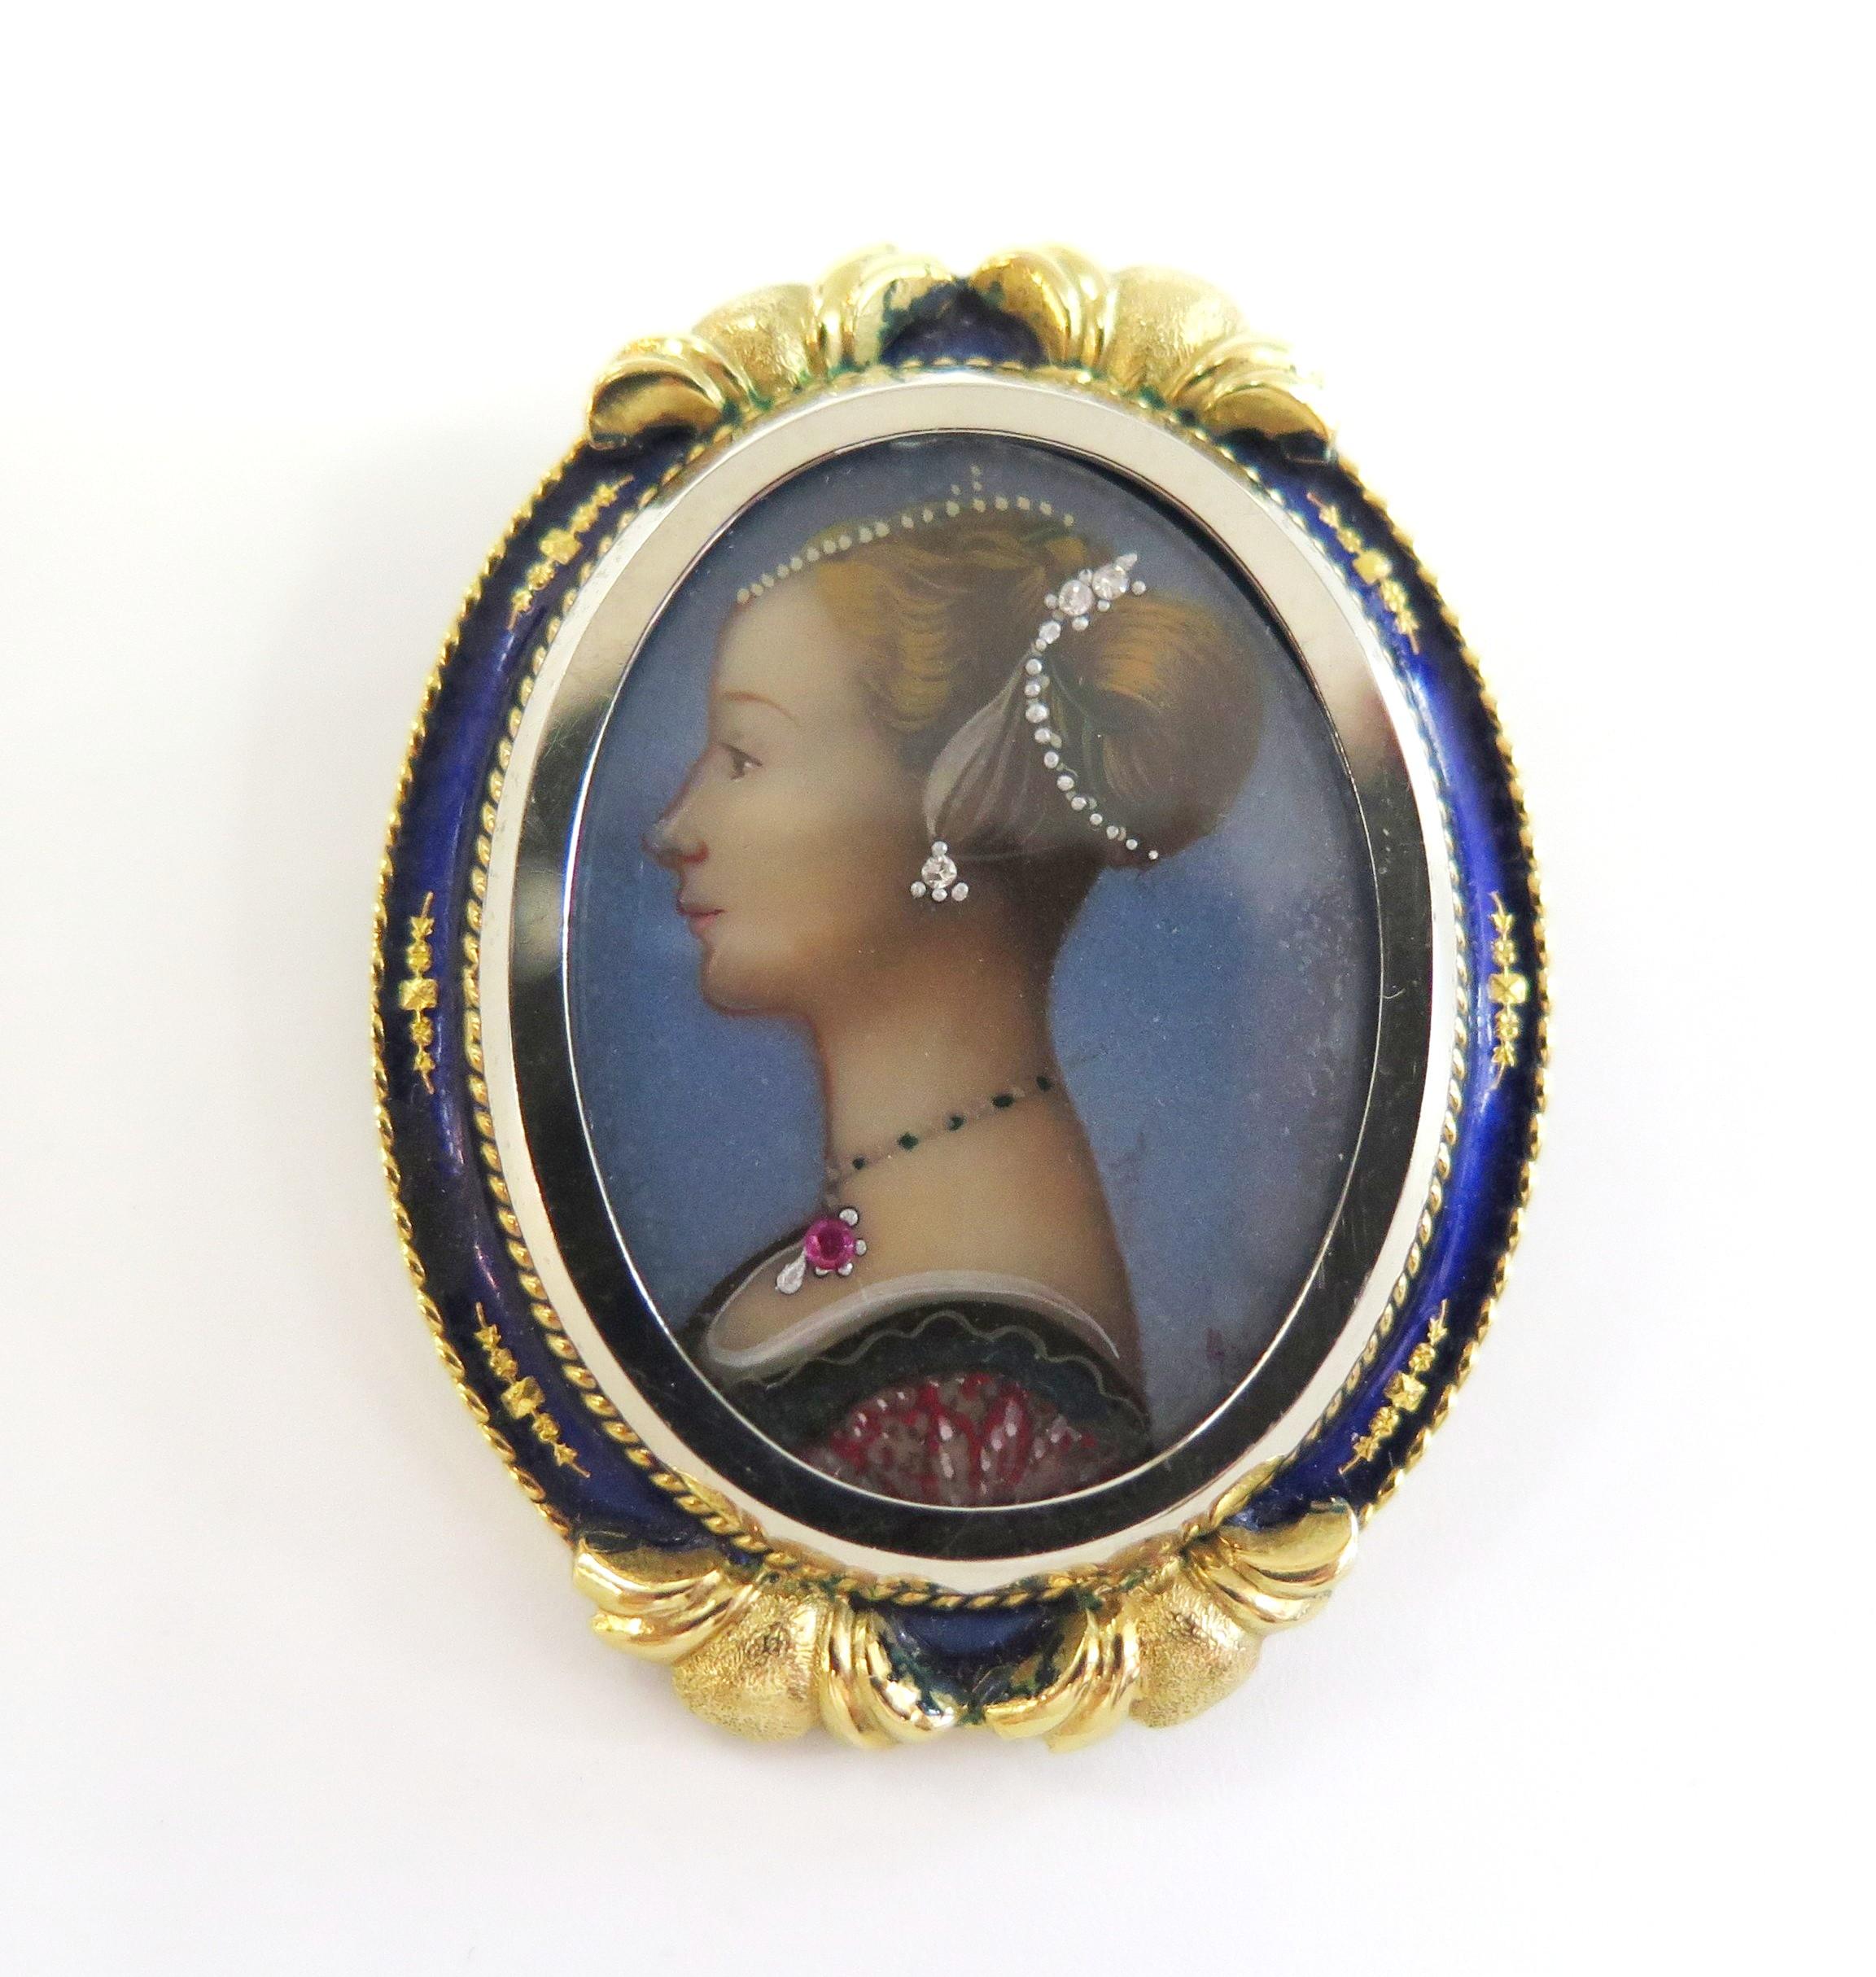 This Antique Victorian Hand Painted Portrait Pendant has a bail that falls behind the piece so it can also be worn as a brooch. 

The painting is a beautifully hand painted depiction of a woman with her hair in a bun with diamond earrings and a ruby